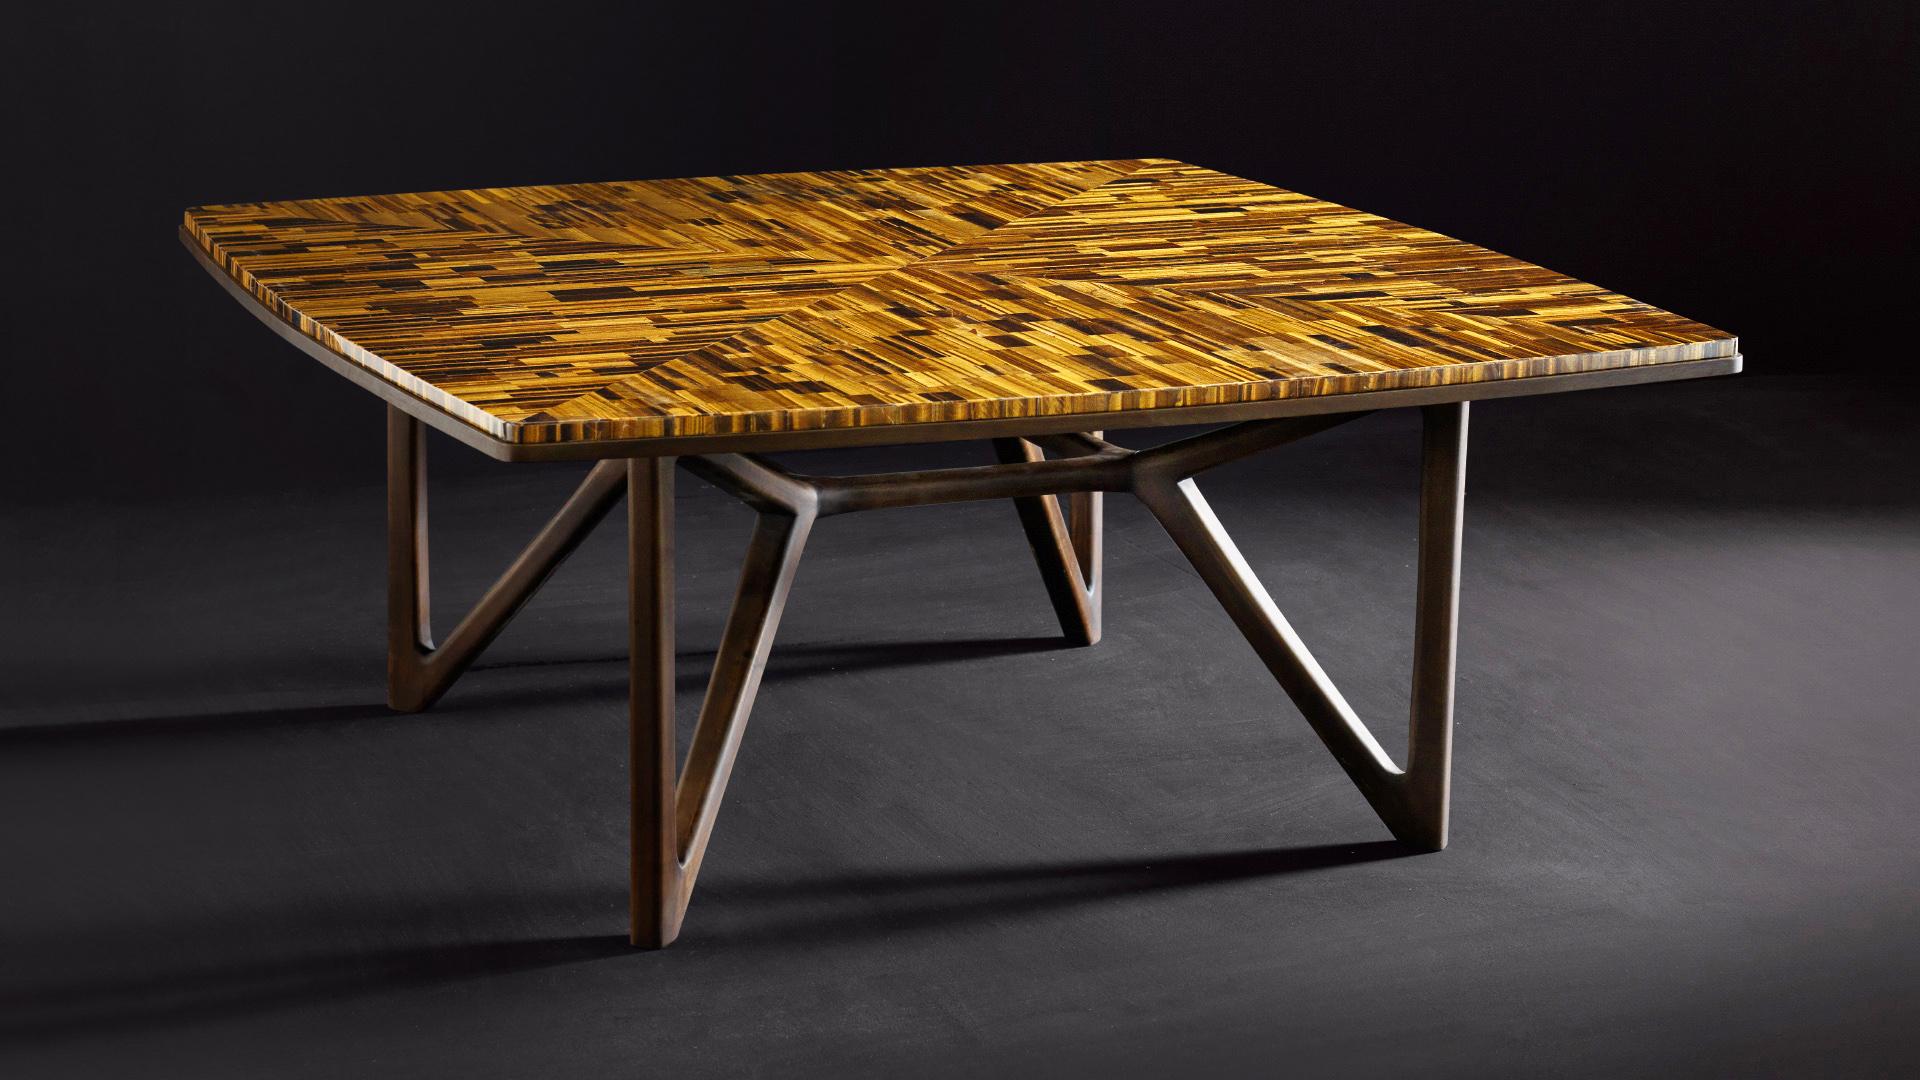 Dining table in Tiger’s Eye stone with wood basement.
Table with a dark wood structure and a mosaic made with Tiger’s Eye stone. The tiles create an iridescent effect, a very suggestive mix of light/dark shades. 
Table dimensions are: 180x180 cm and